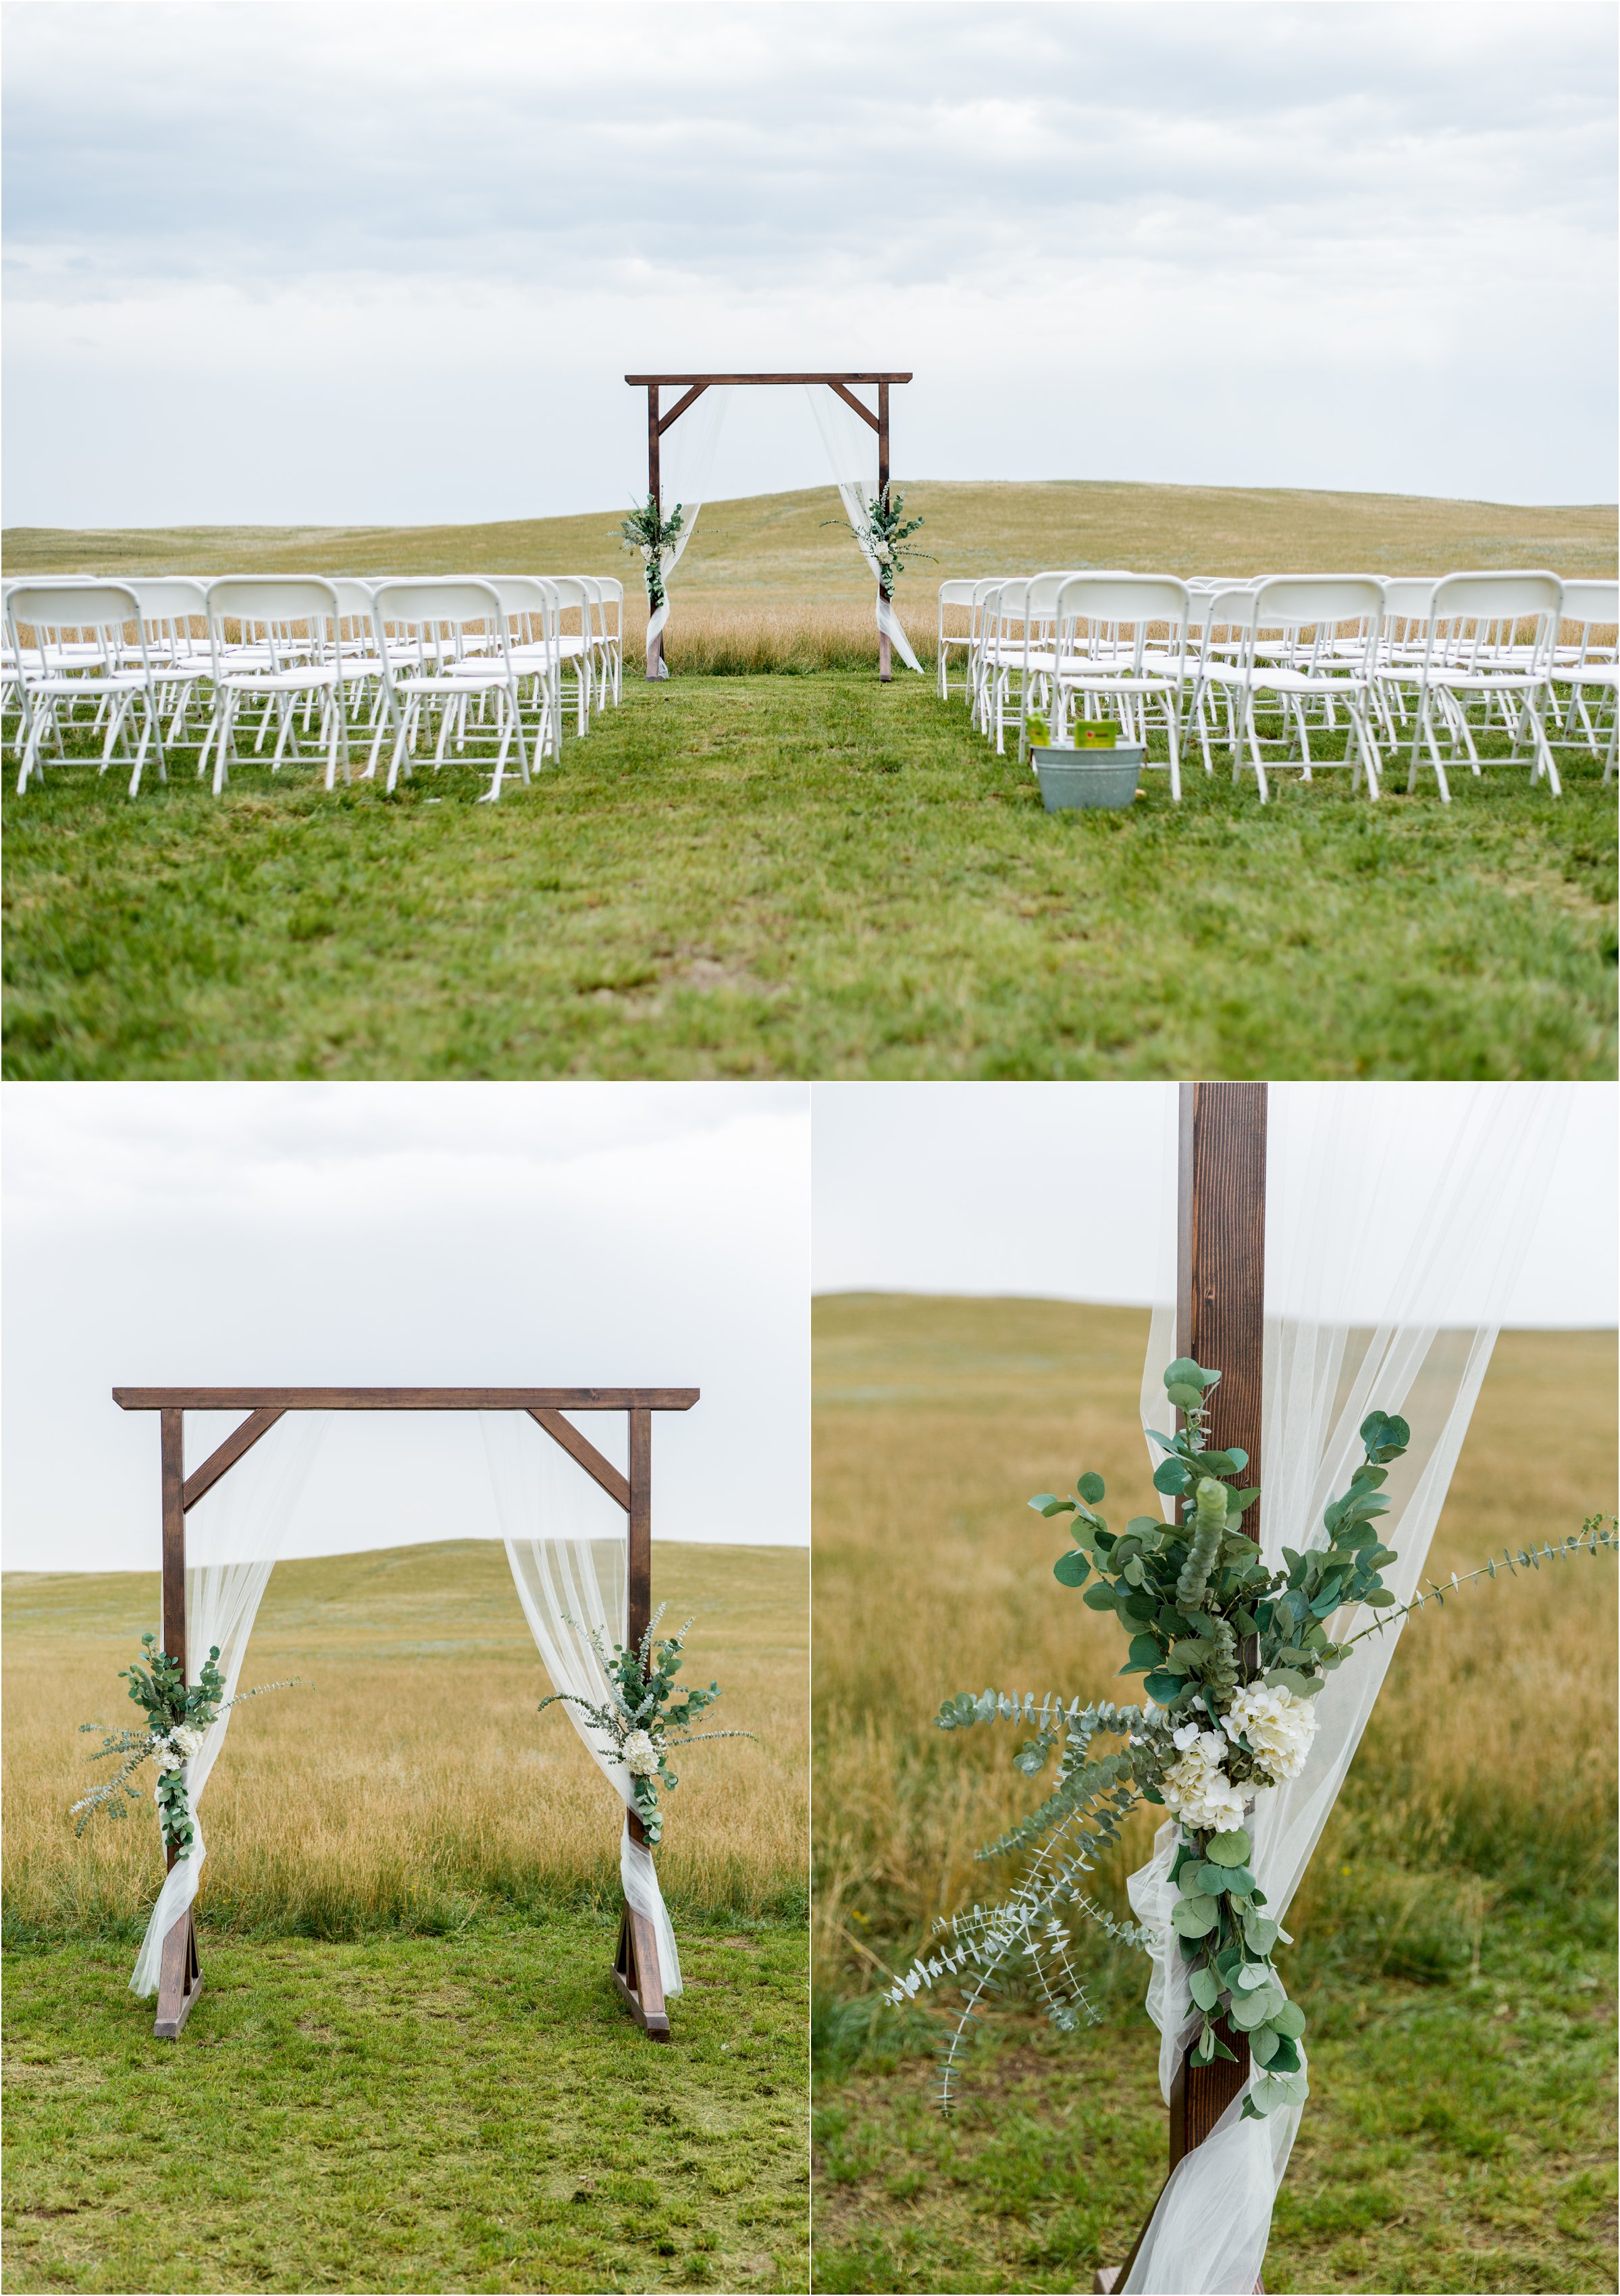 the ceremony set up for a country wedding on a farm outside of cheyenne